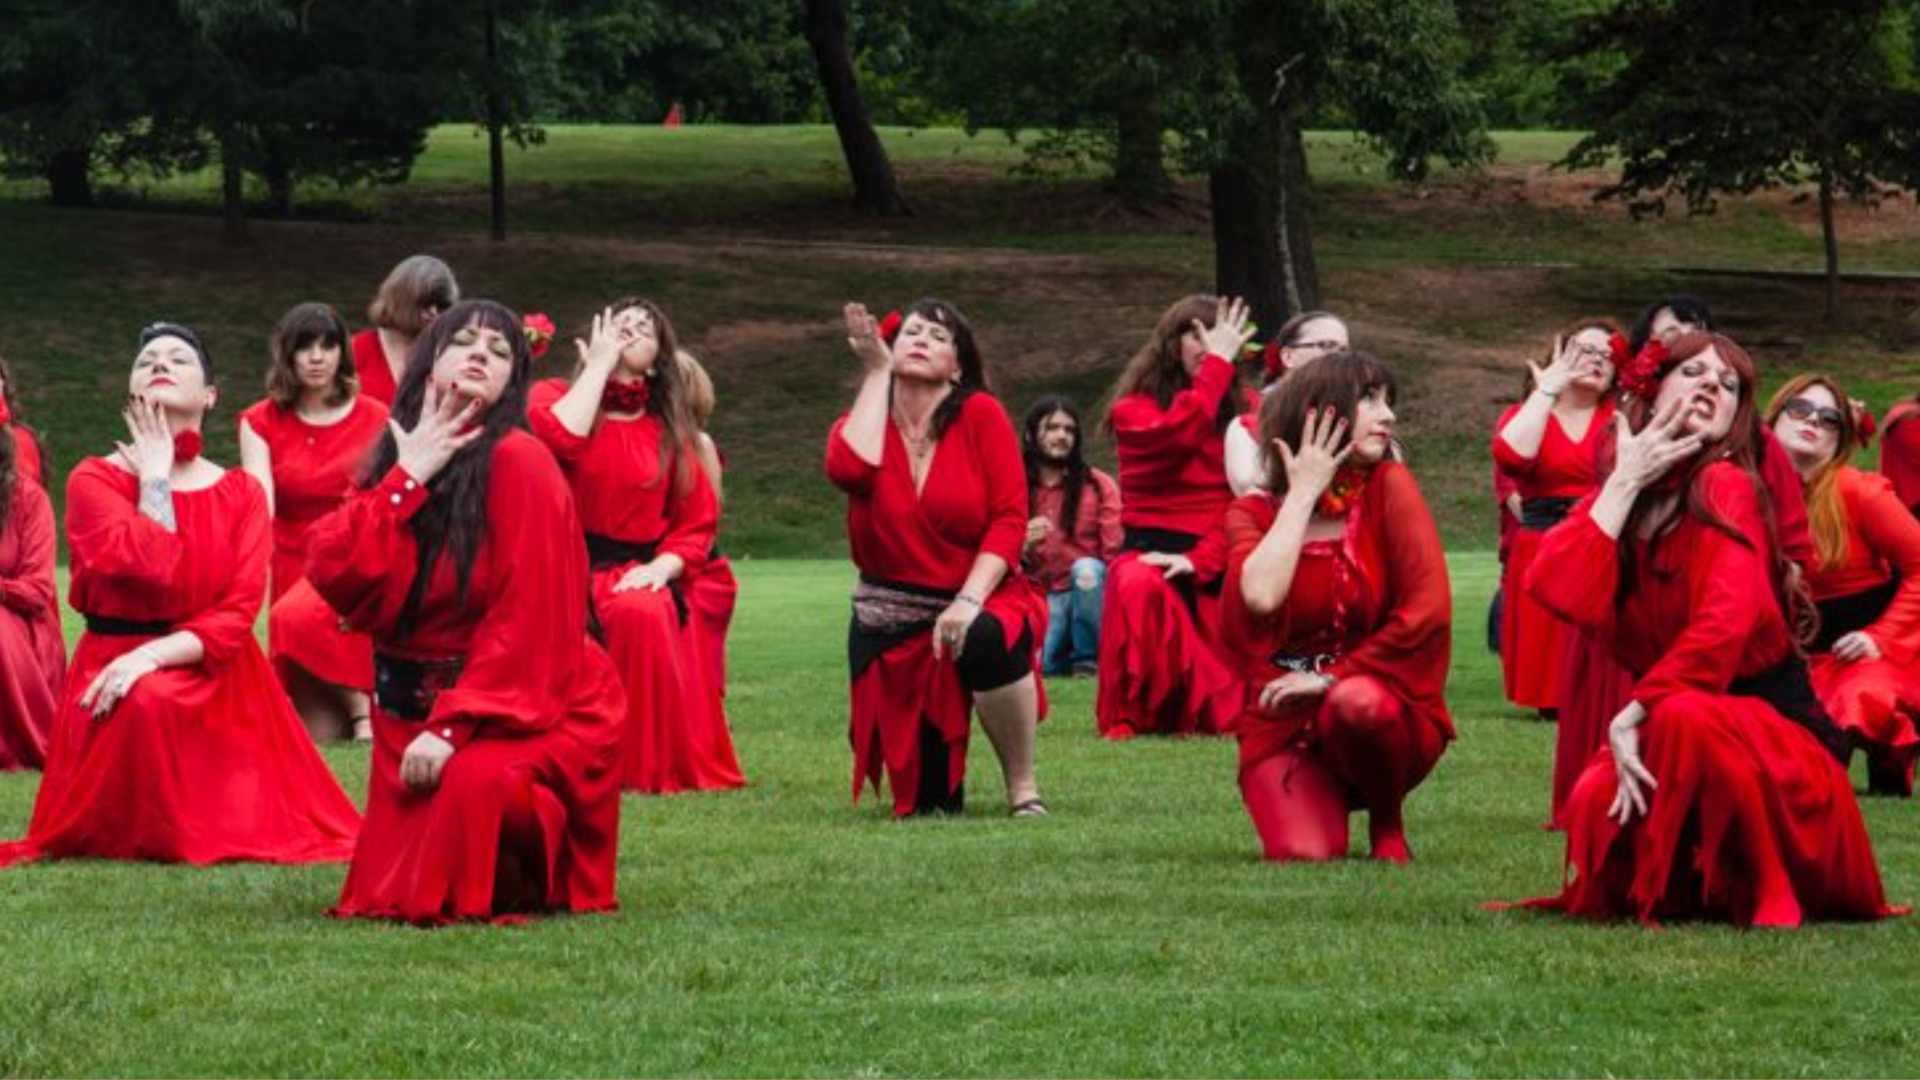 A group of women in a public park wearing red dresses crouch on one knee and put their hands to their faces to recreate a Kate Bush music video